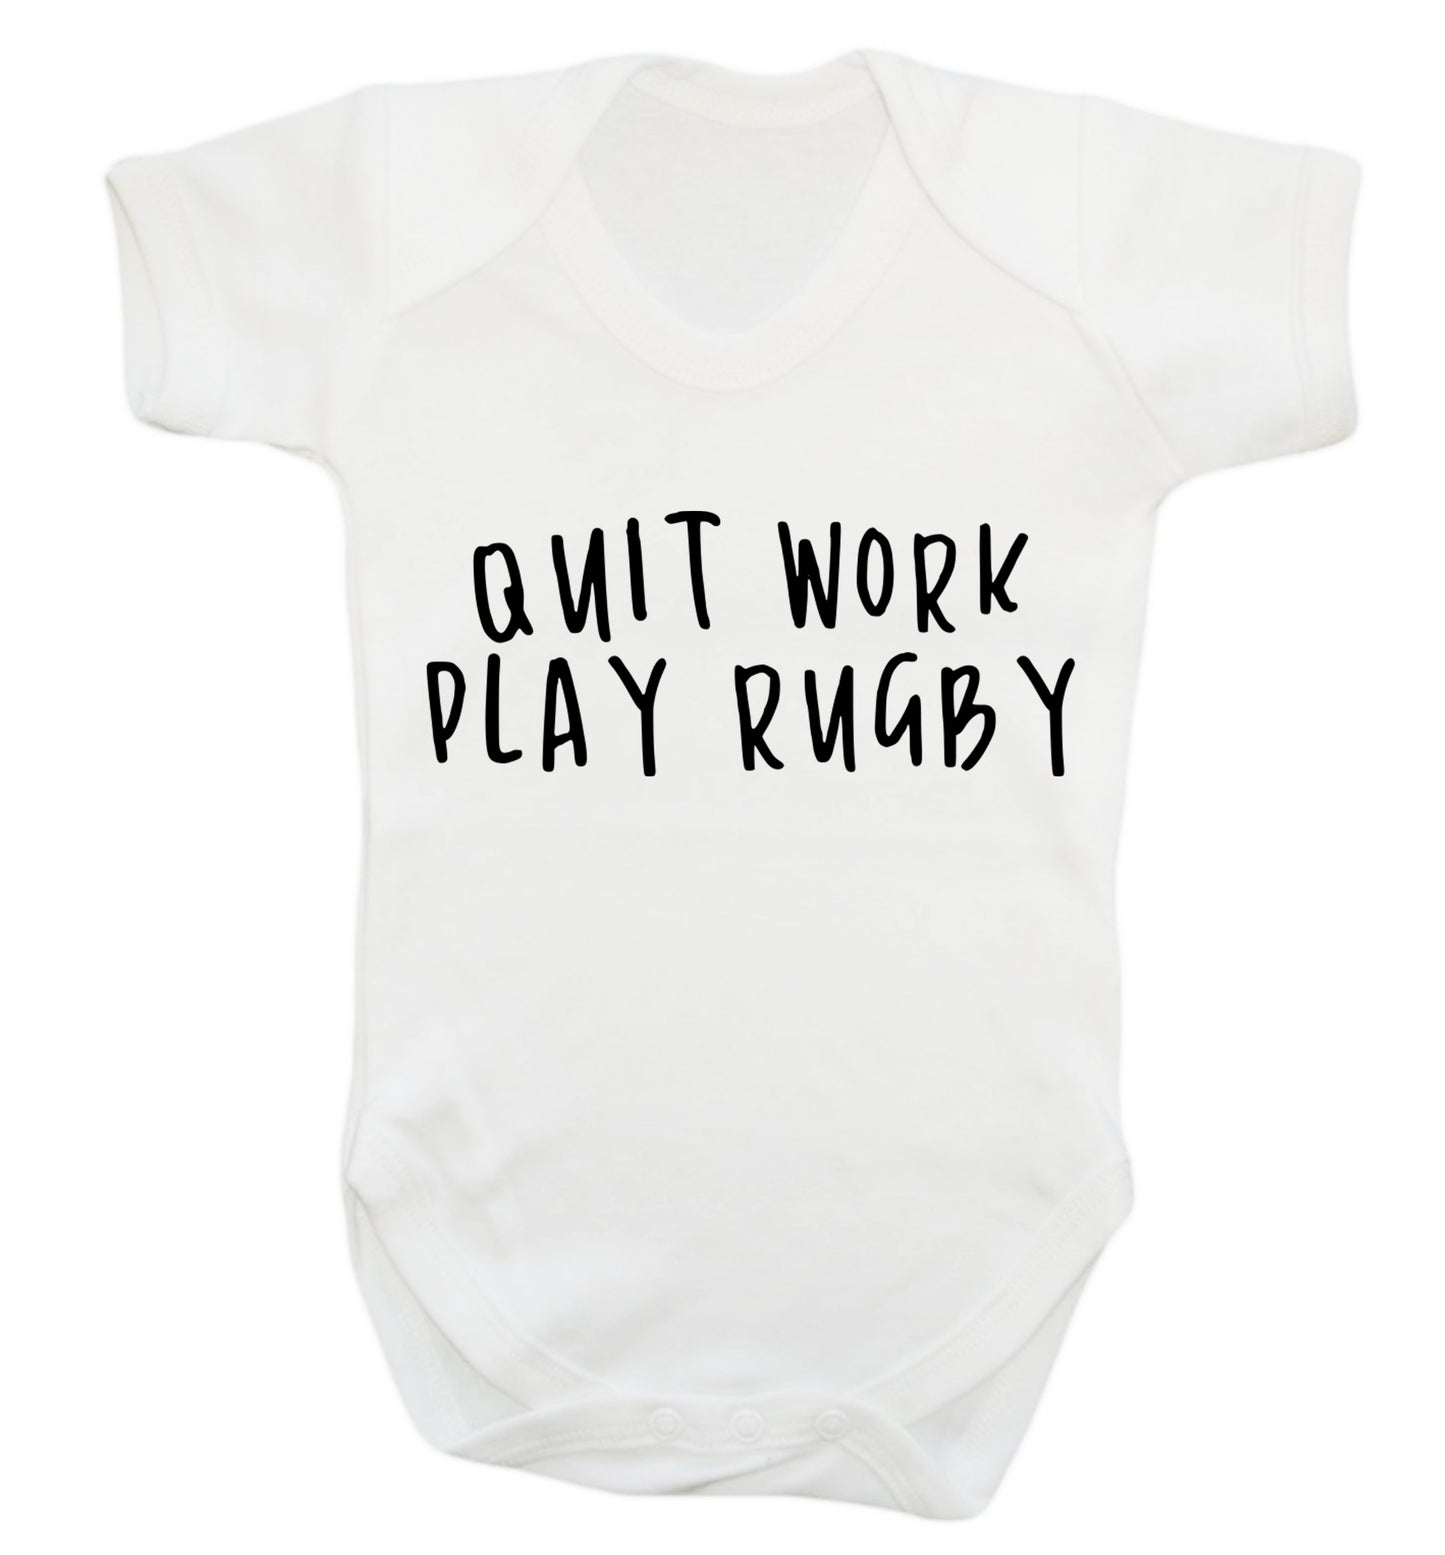 Quit work play rugby Baby Vest white 18-24 months